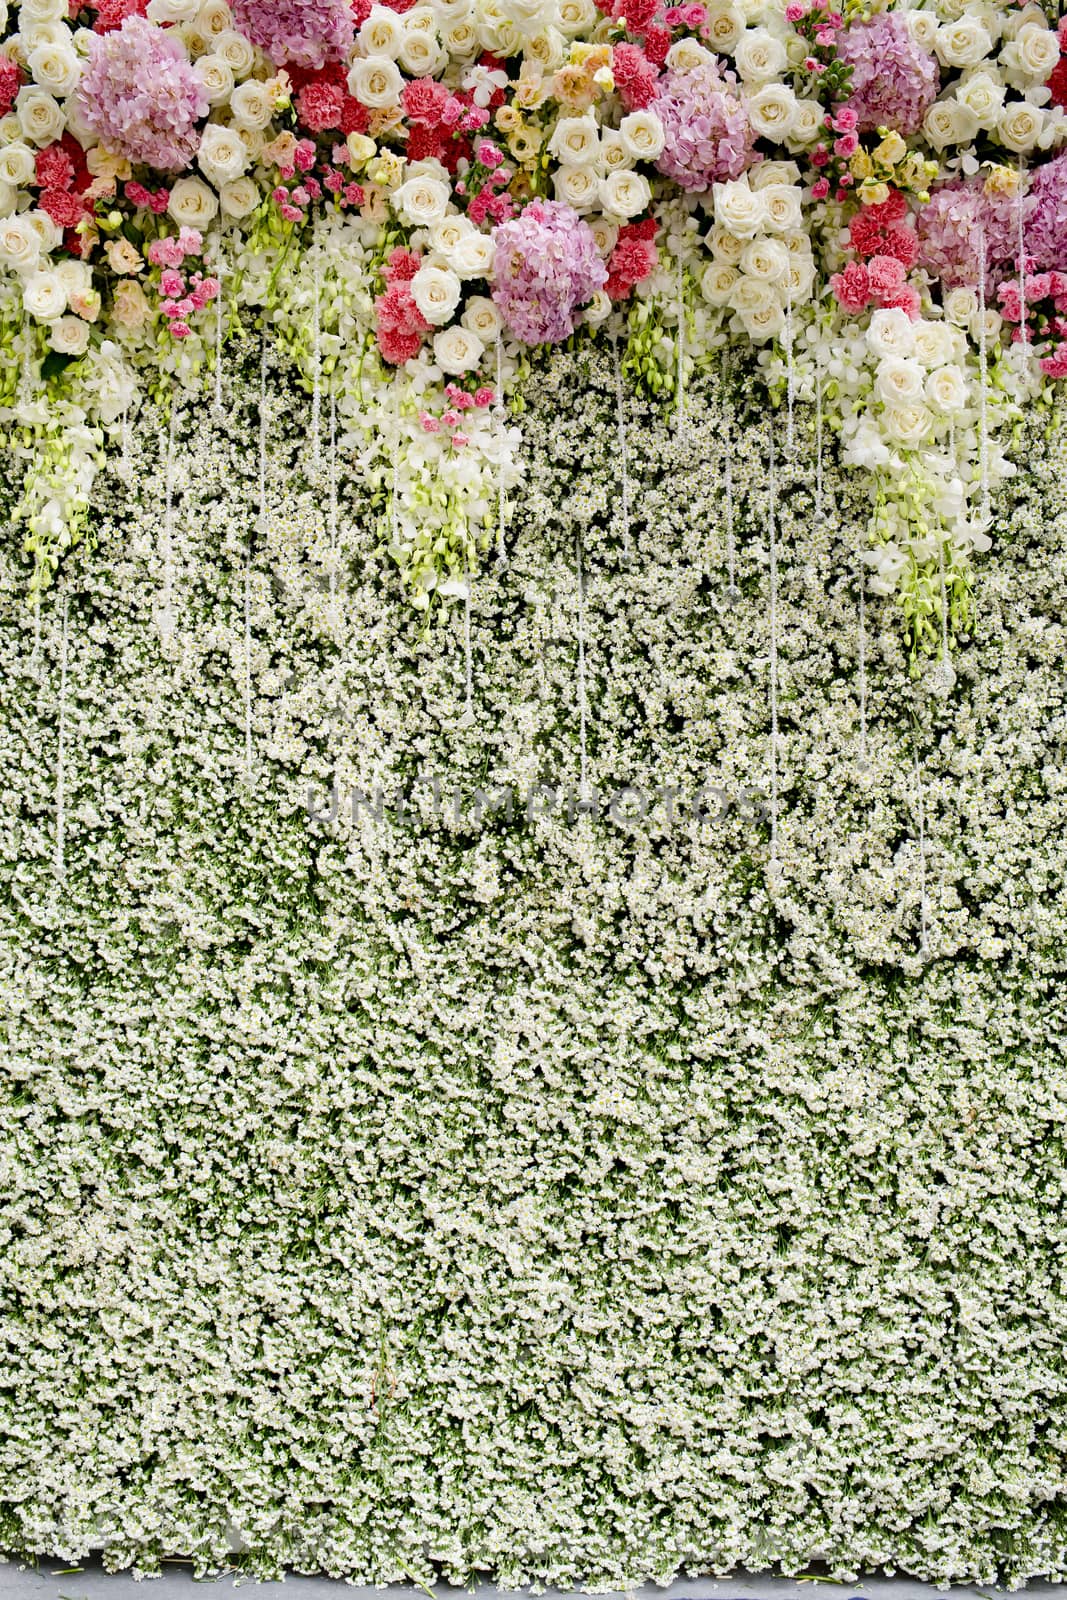 Colorful flowers with green wall for wedding backdrop